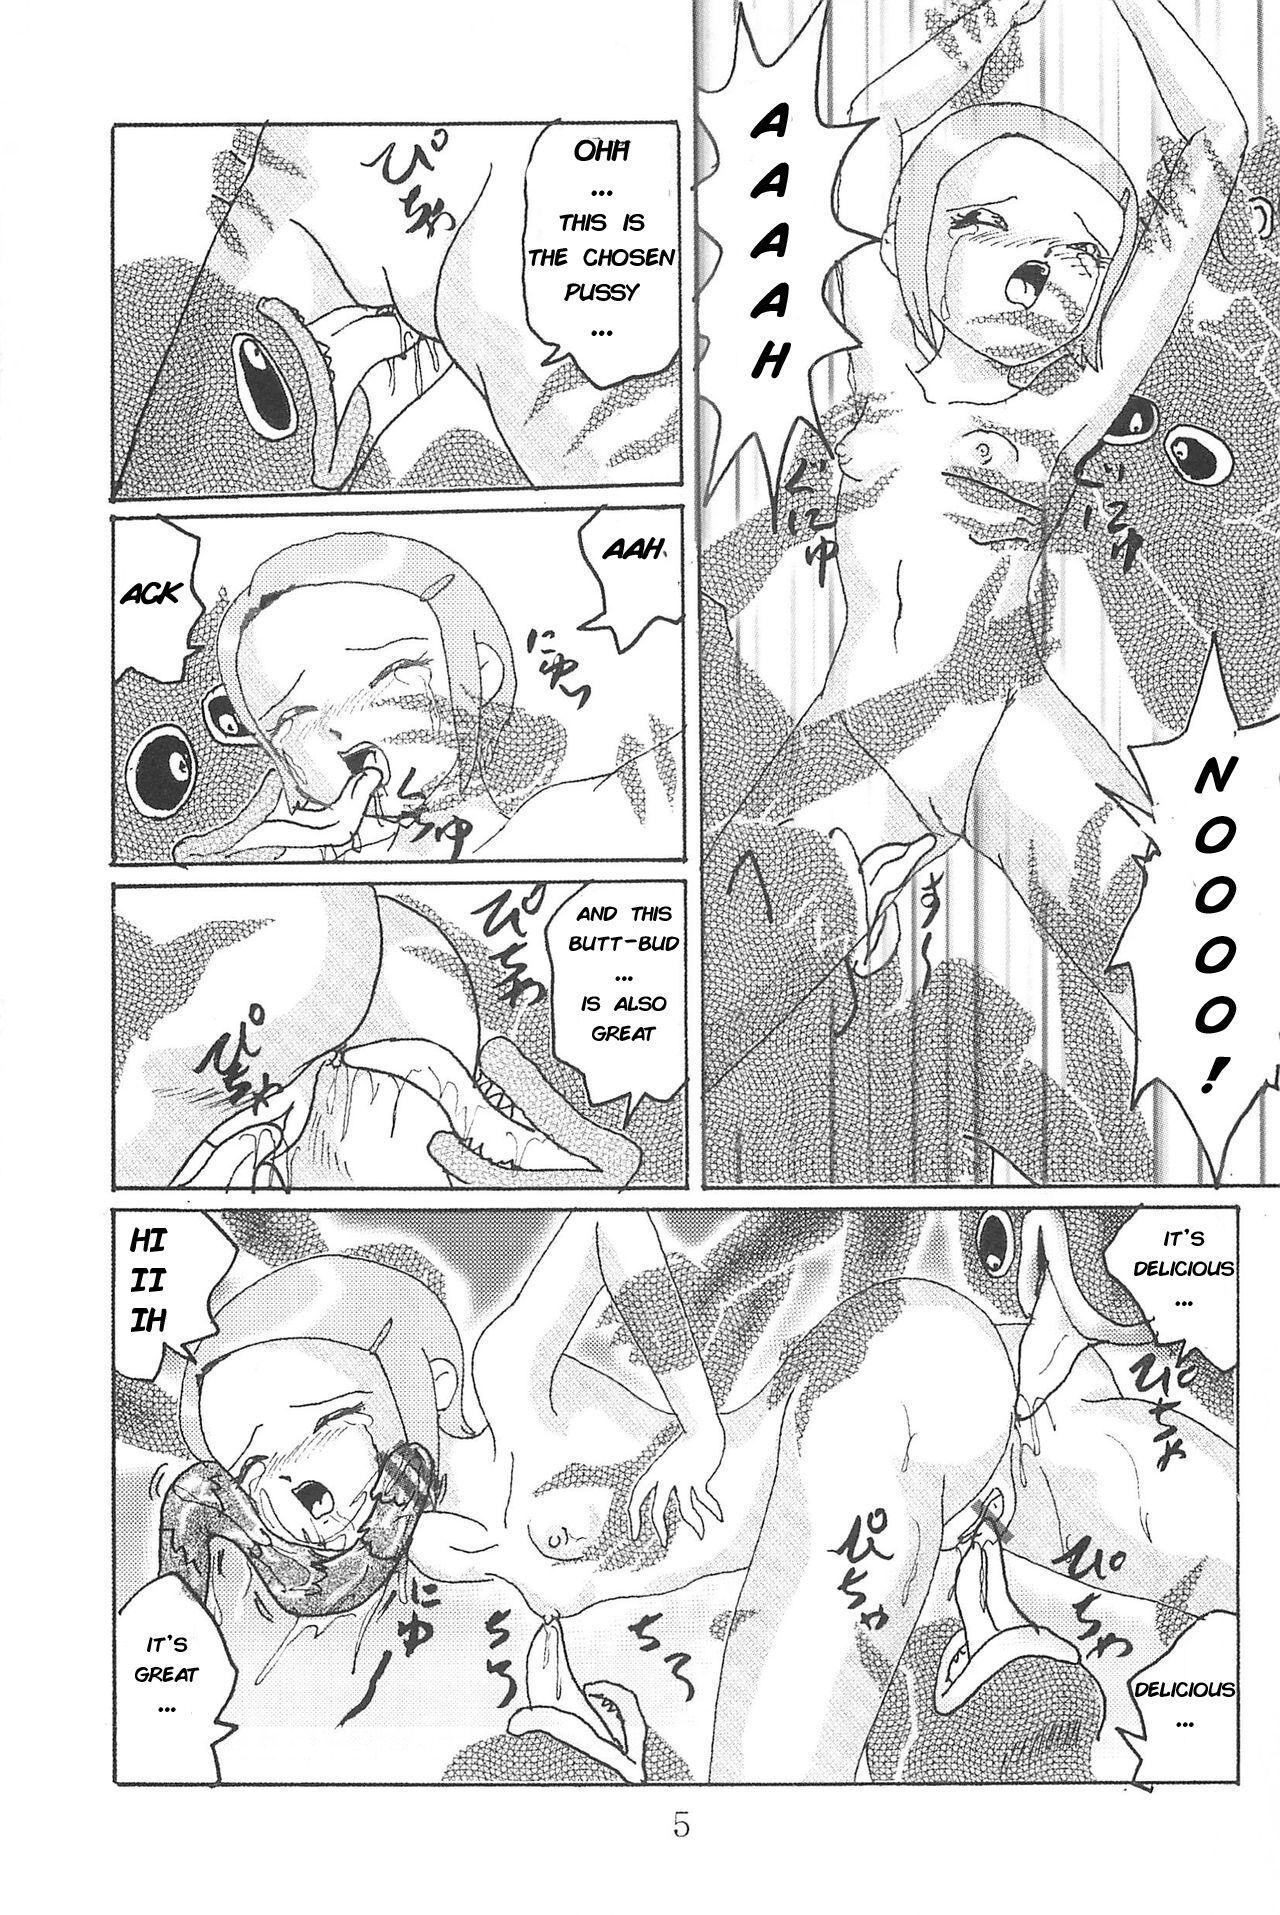 Perfect Body Blow Up 8 - Digimon adventure Tight - Page 4